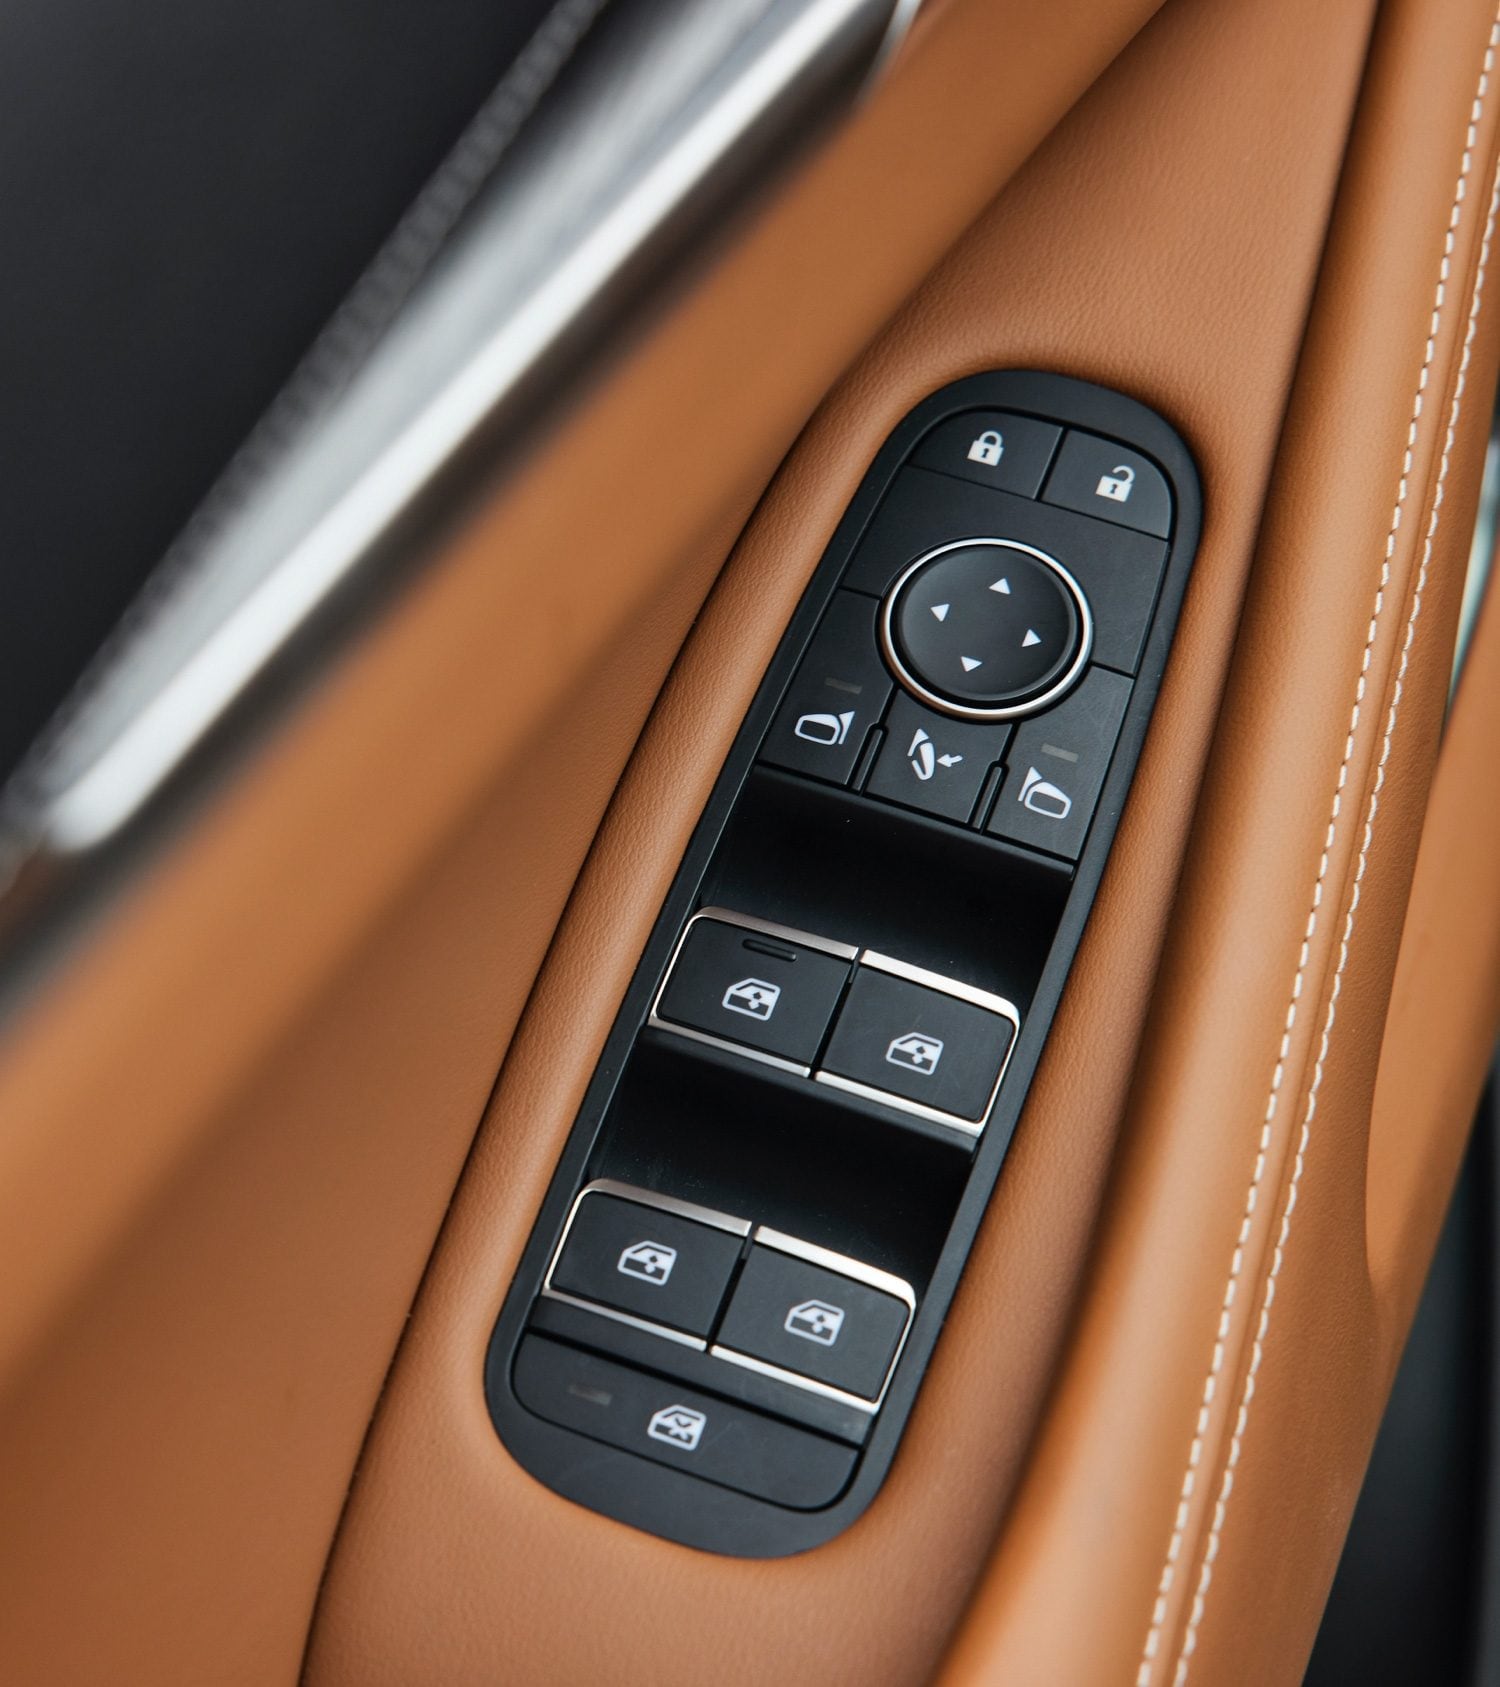 Power window buttons surrounded by luxurious brown leather in the 2022 INFINITI QX60 SUV